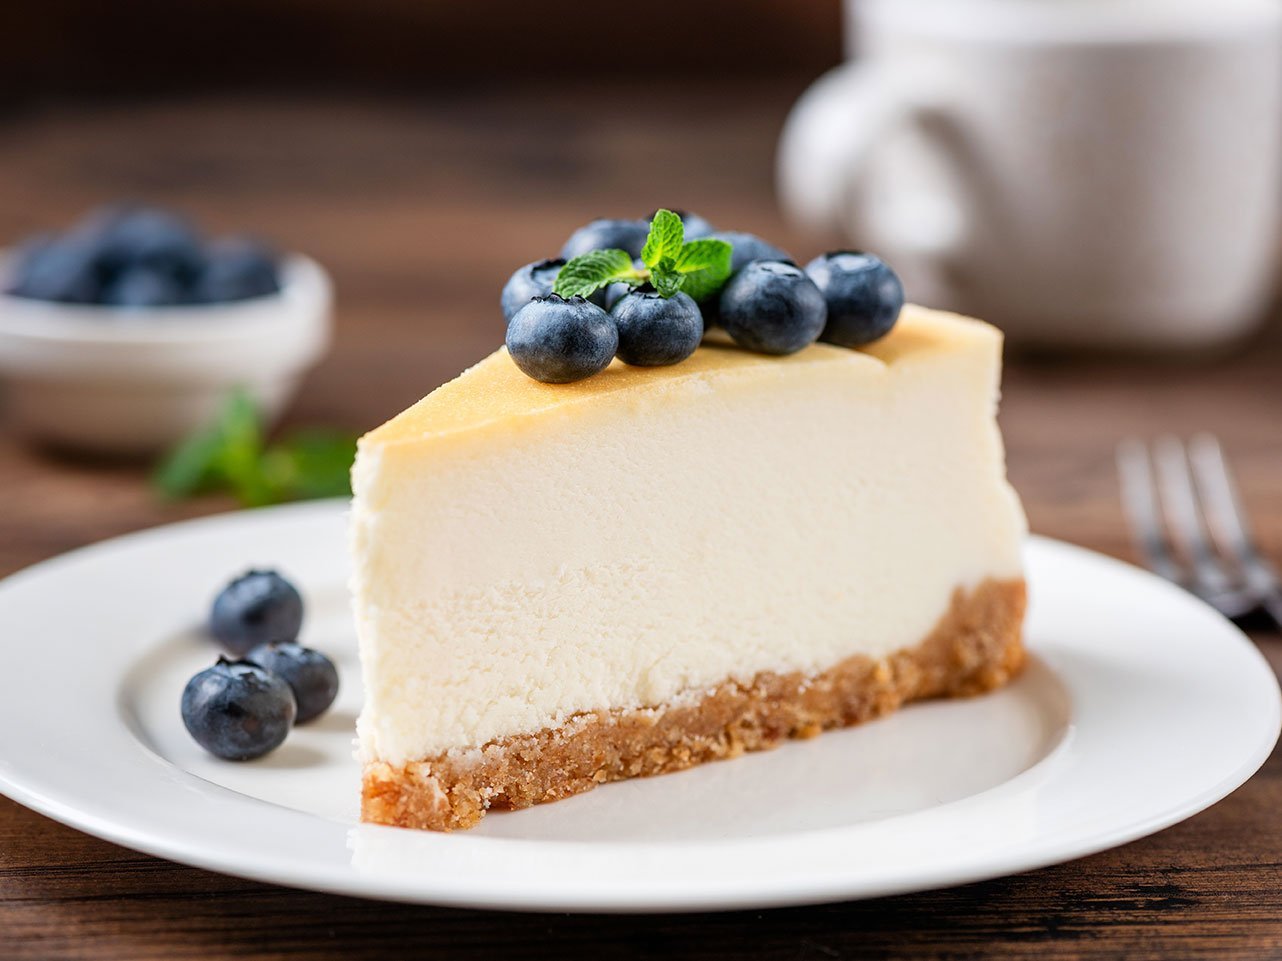 Cheesecake Slice With Blueberries